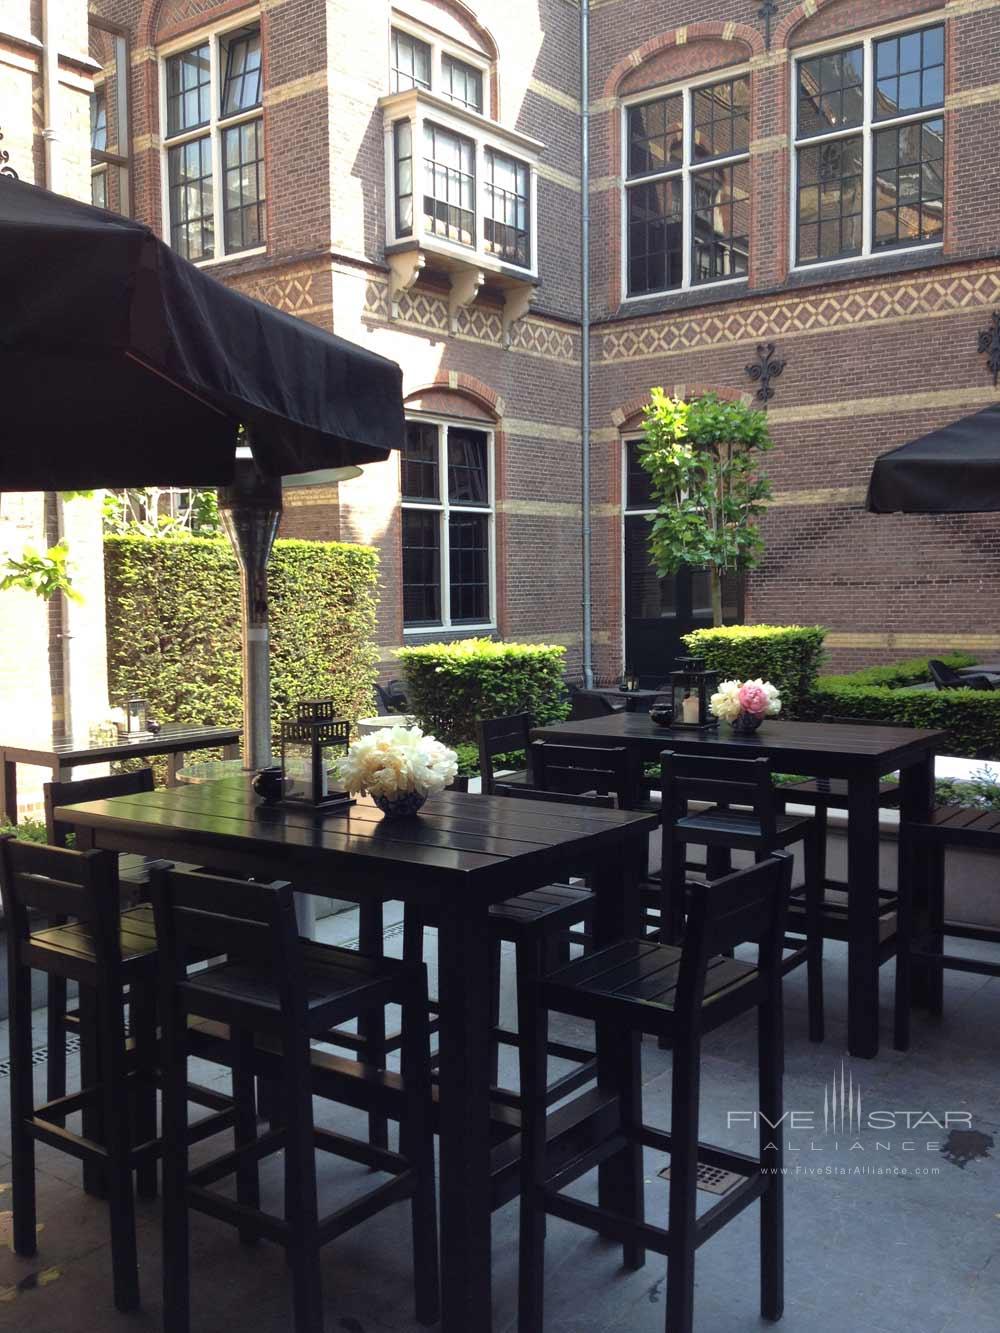 Outdoor lounge area at The College Hotel, Amsterdam